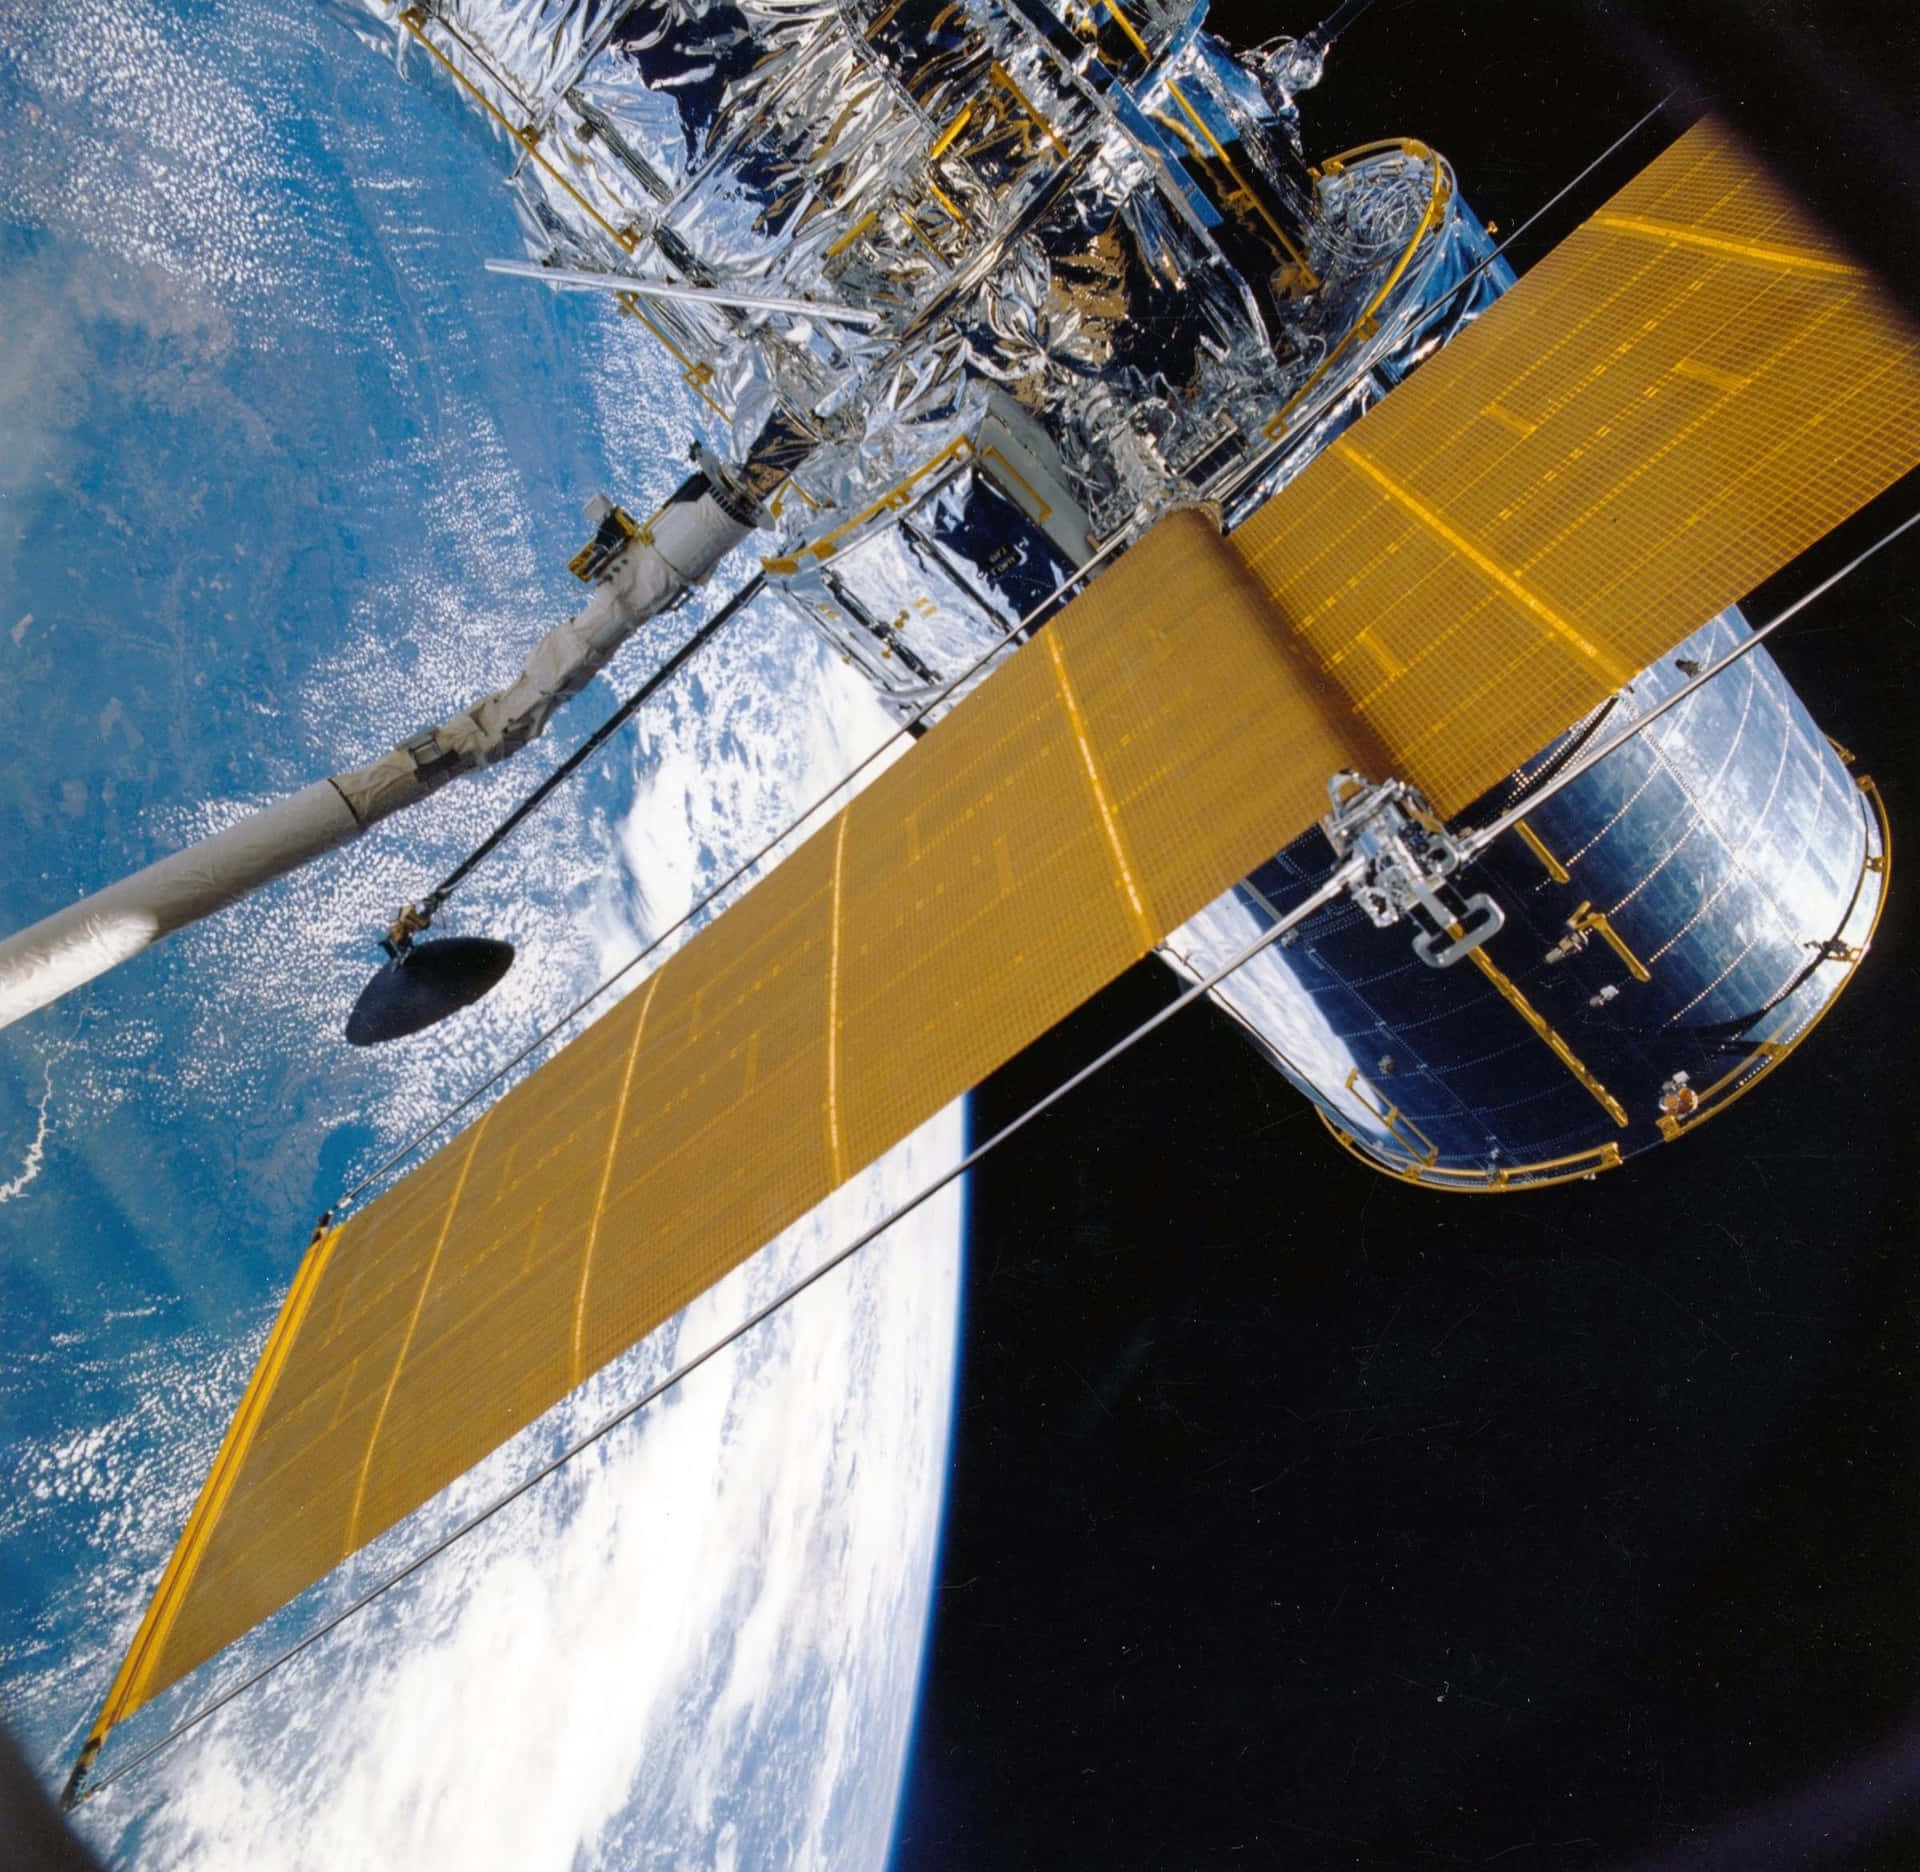 A Space Station With A Yellow Antenna